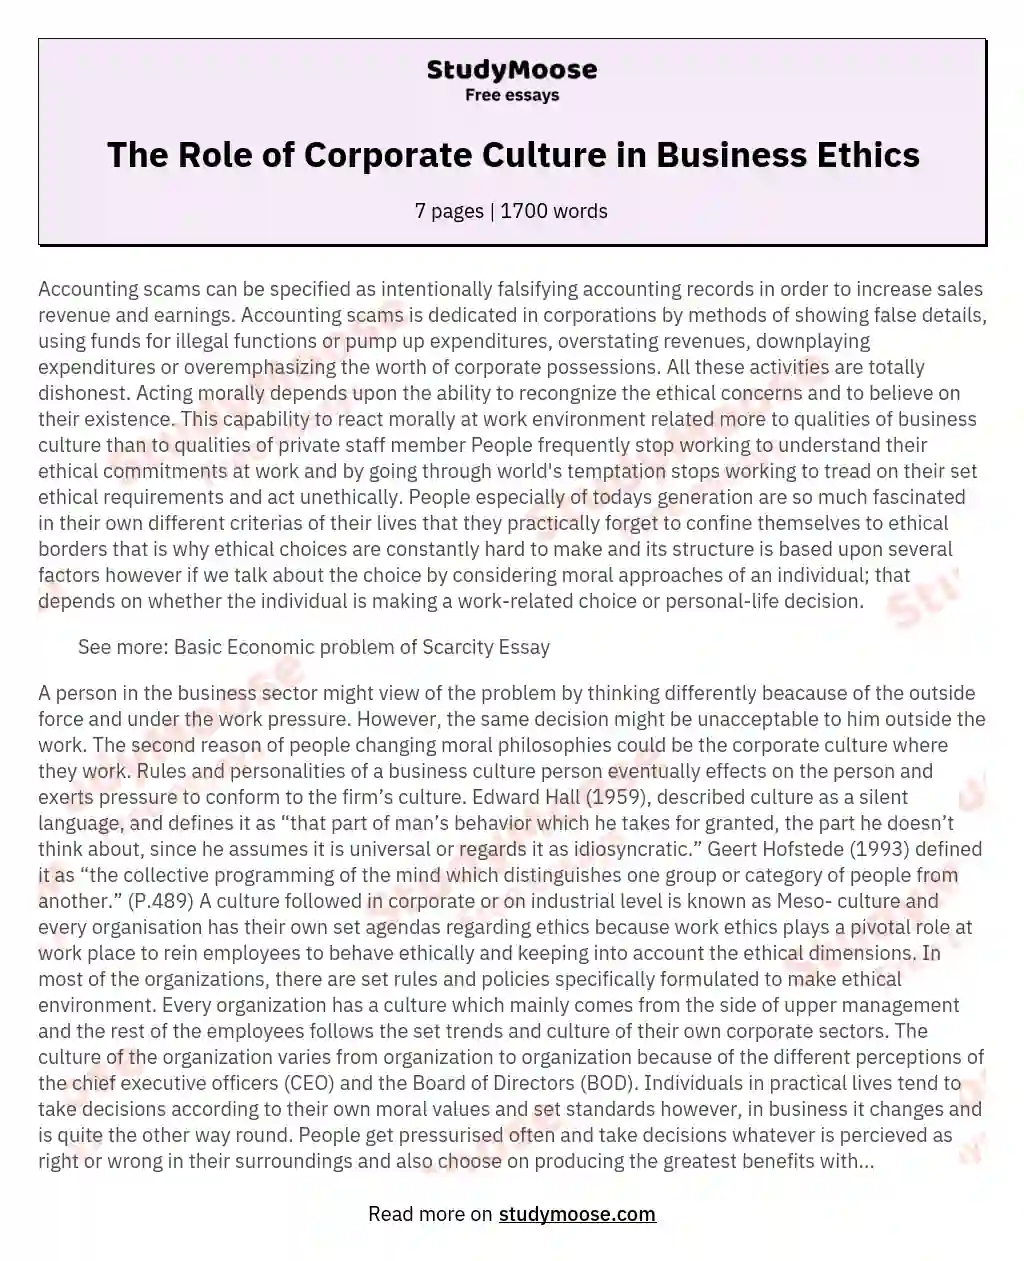 The Role of Corporate Culture in Business Ethics essay